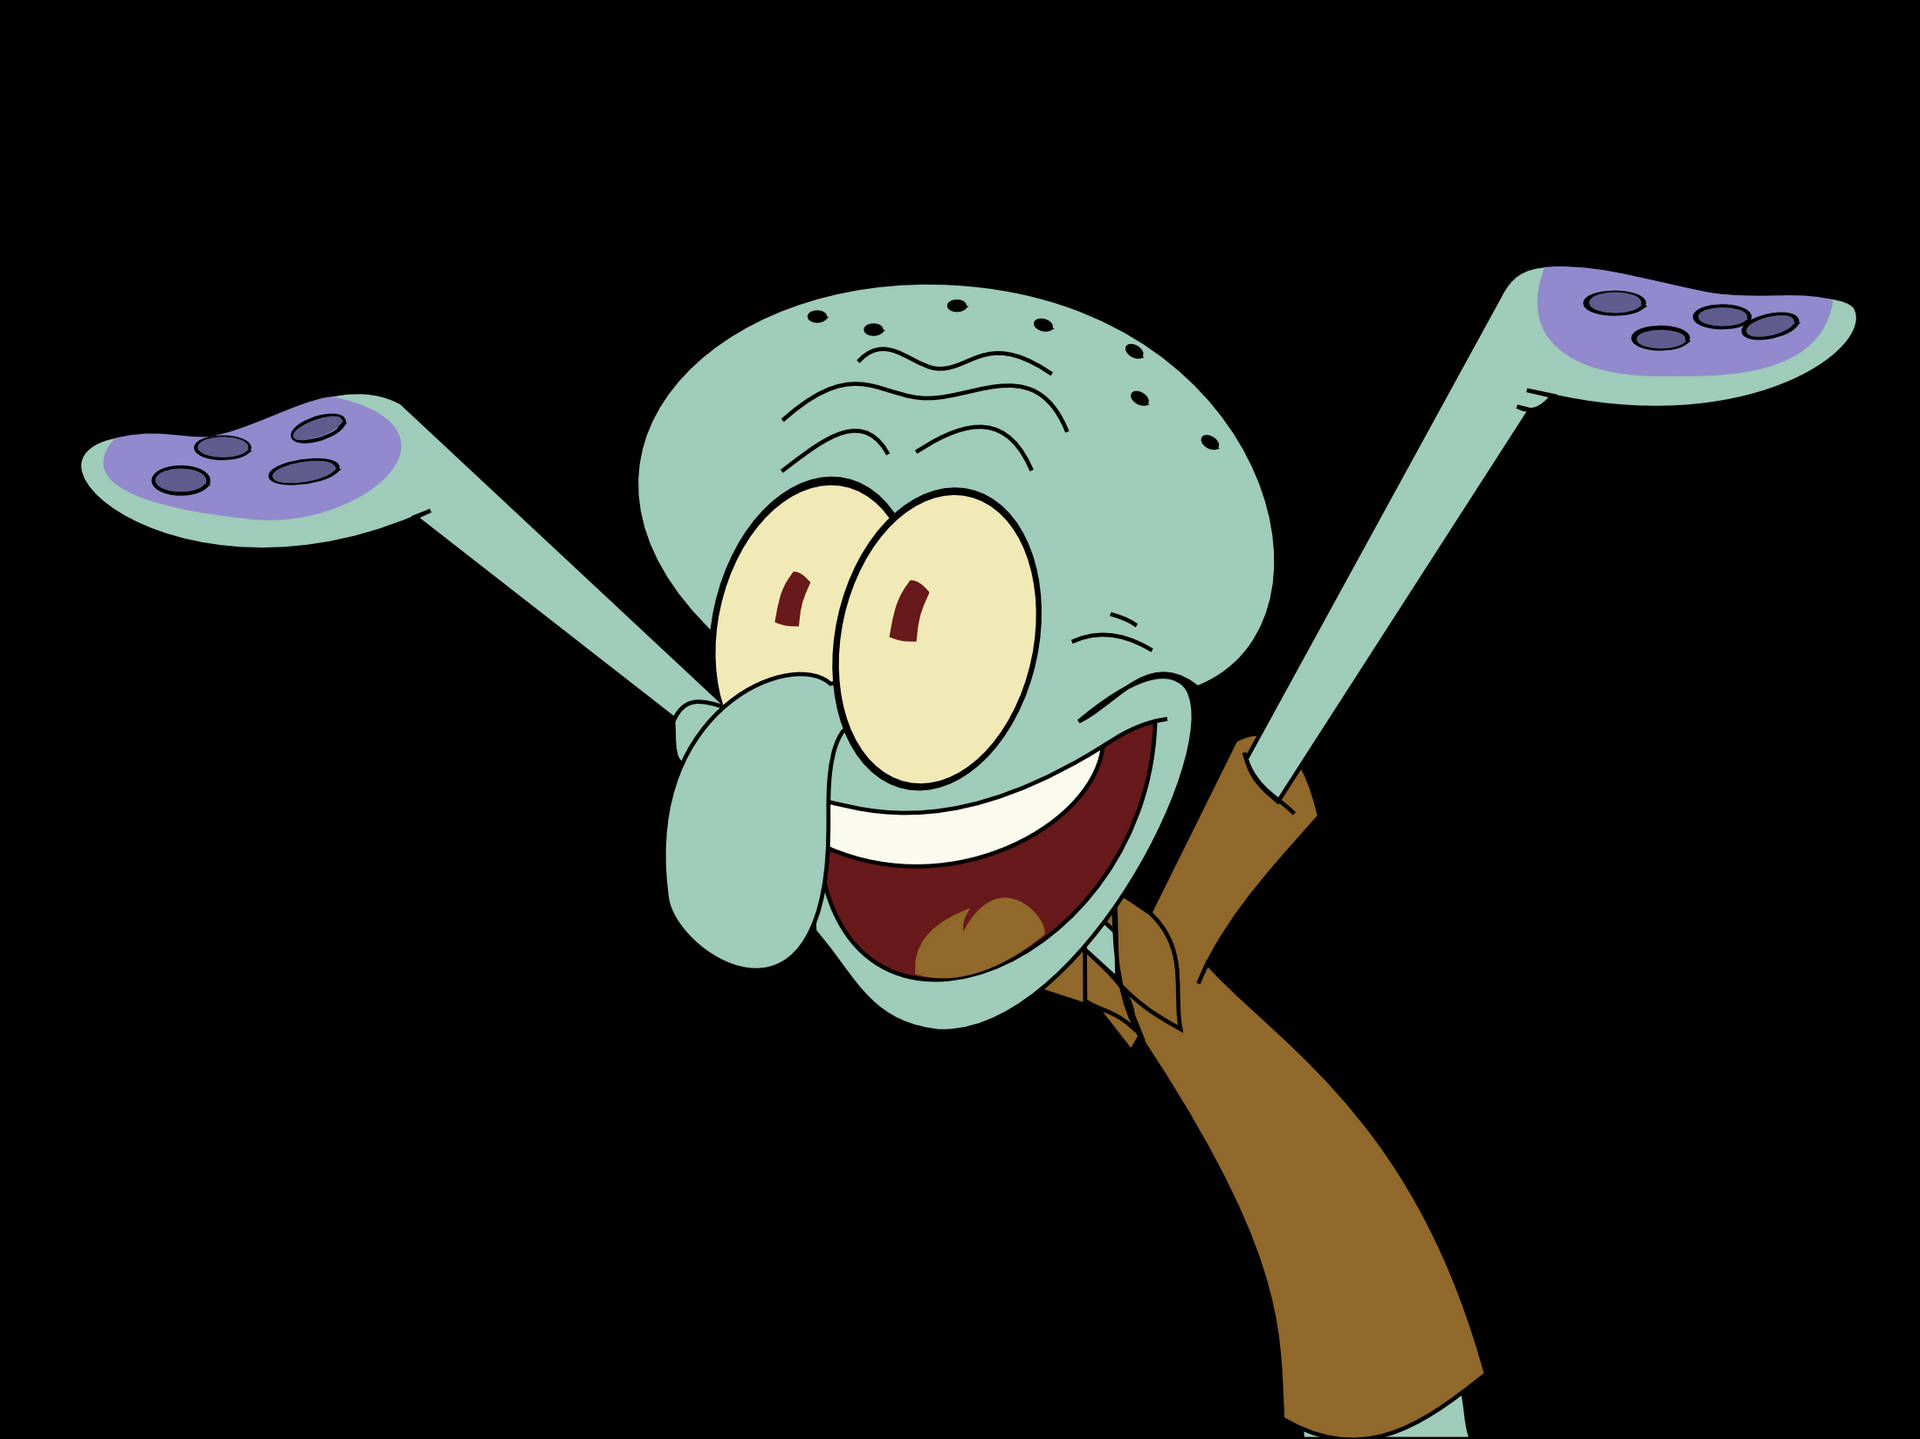 Squidward Tentacles Cynical Character Wallpaper